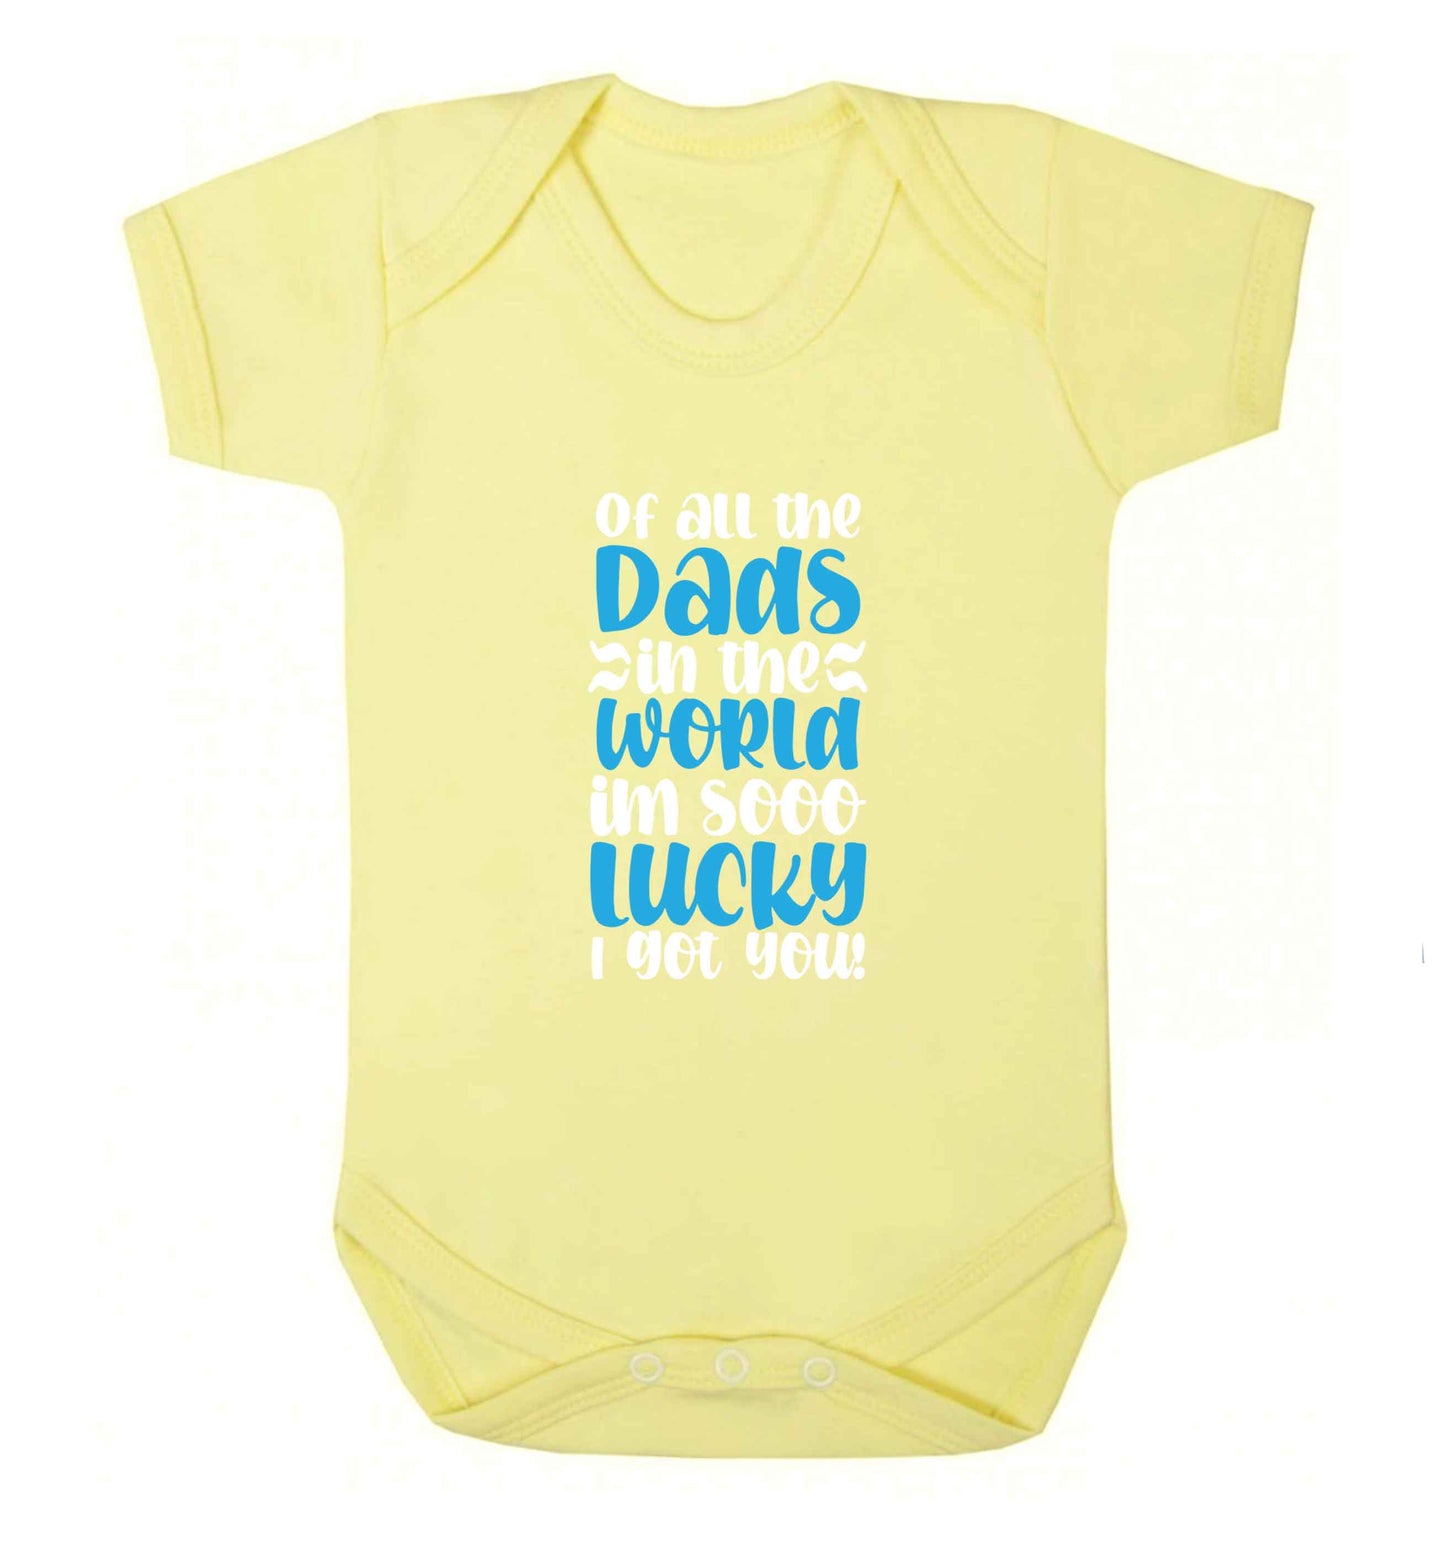 I'm as lucky as can be the worlds greatest dad belongs to me! baby vest pale yellow 18-24 months